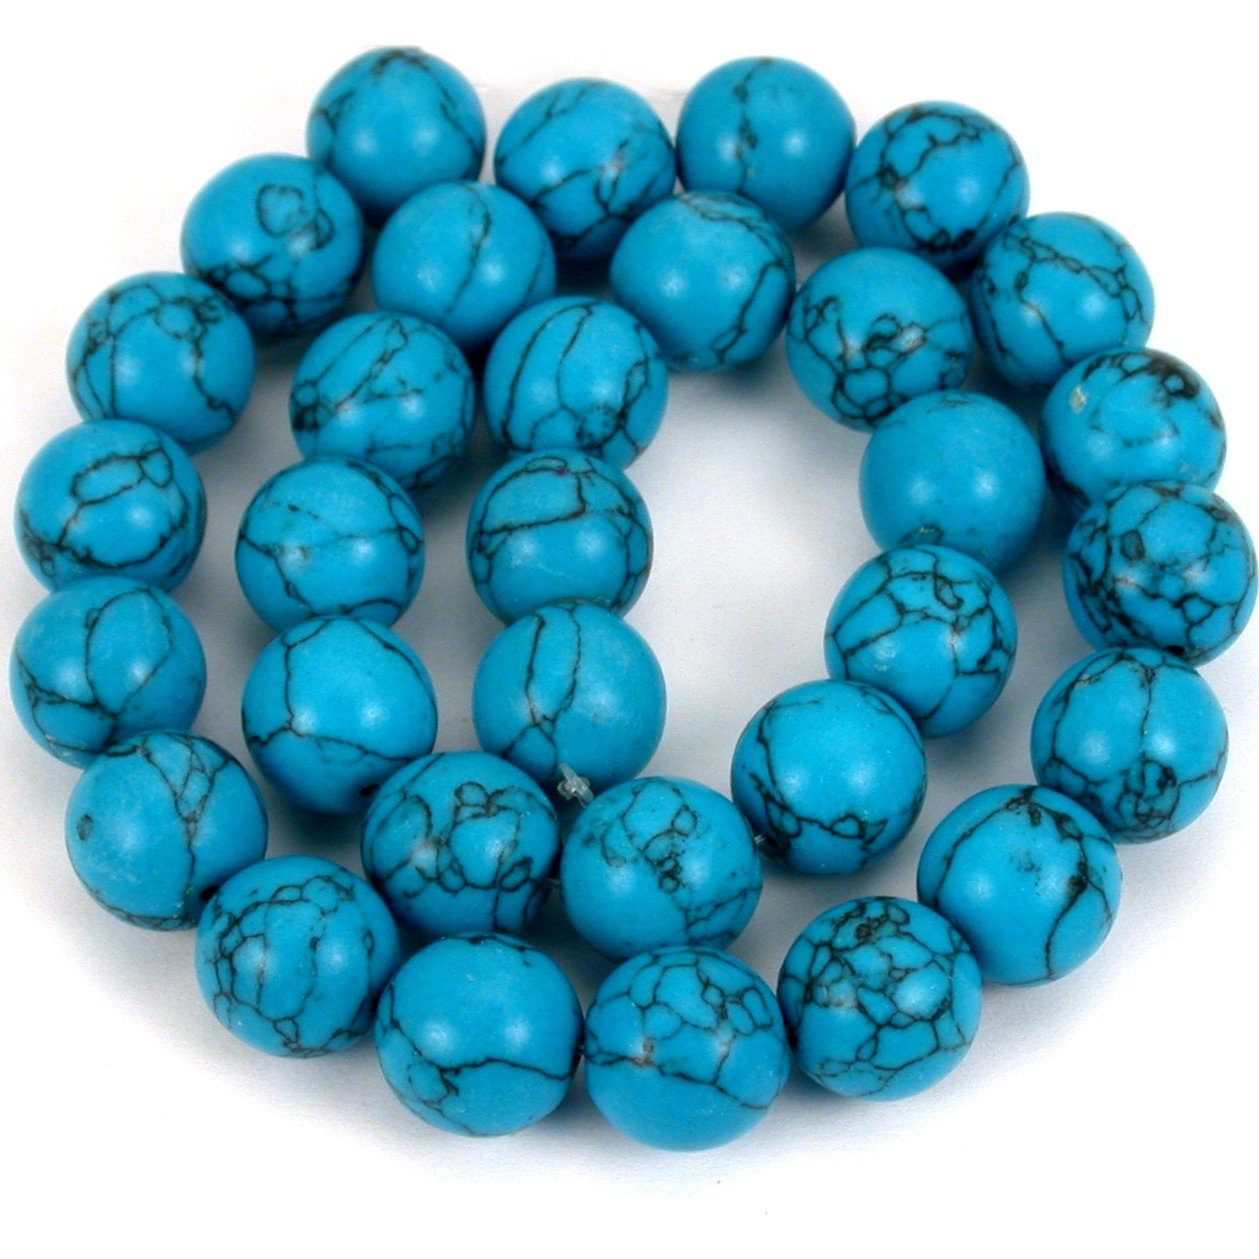 Turquoise Matrix Synthetic Round Beads 12mm 1 Strand